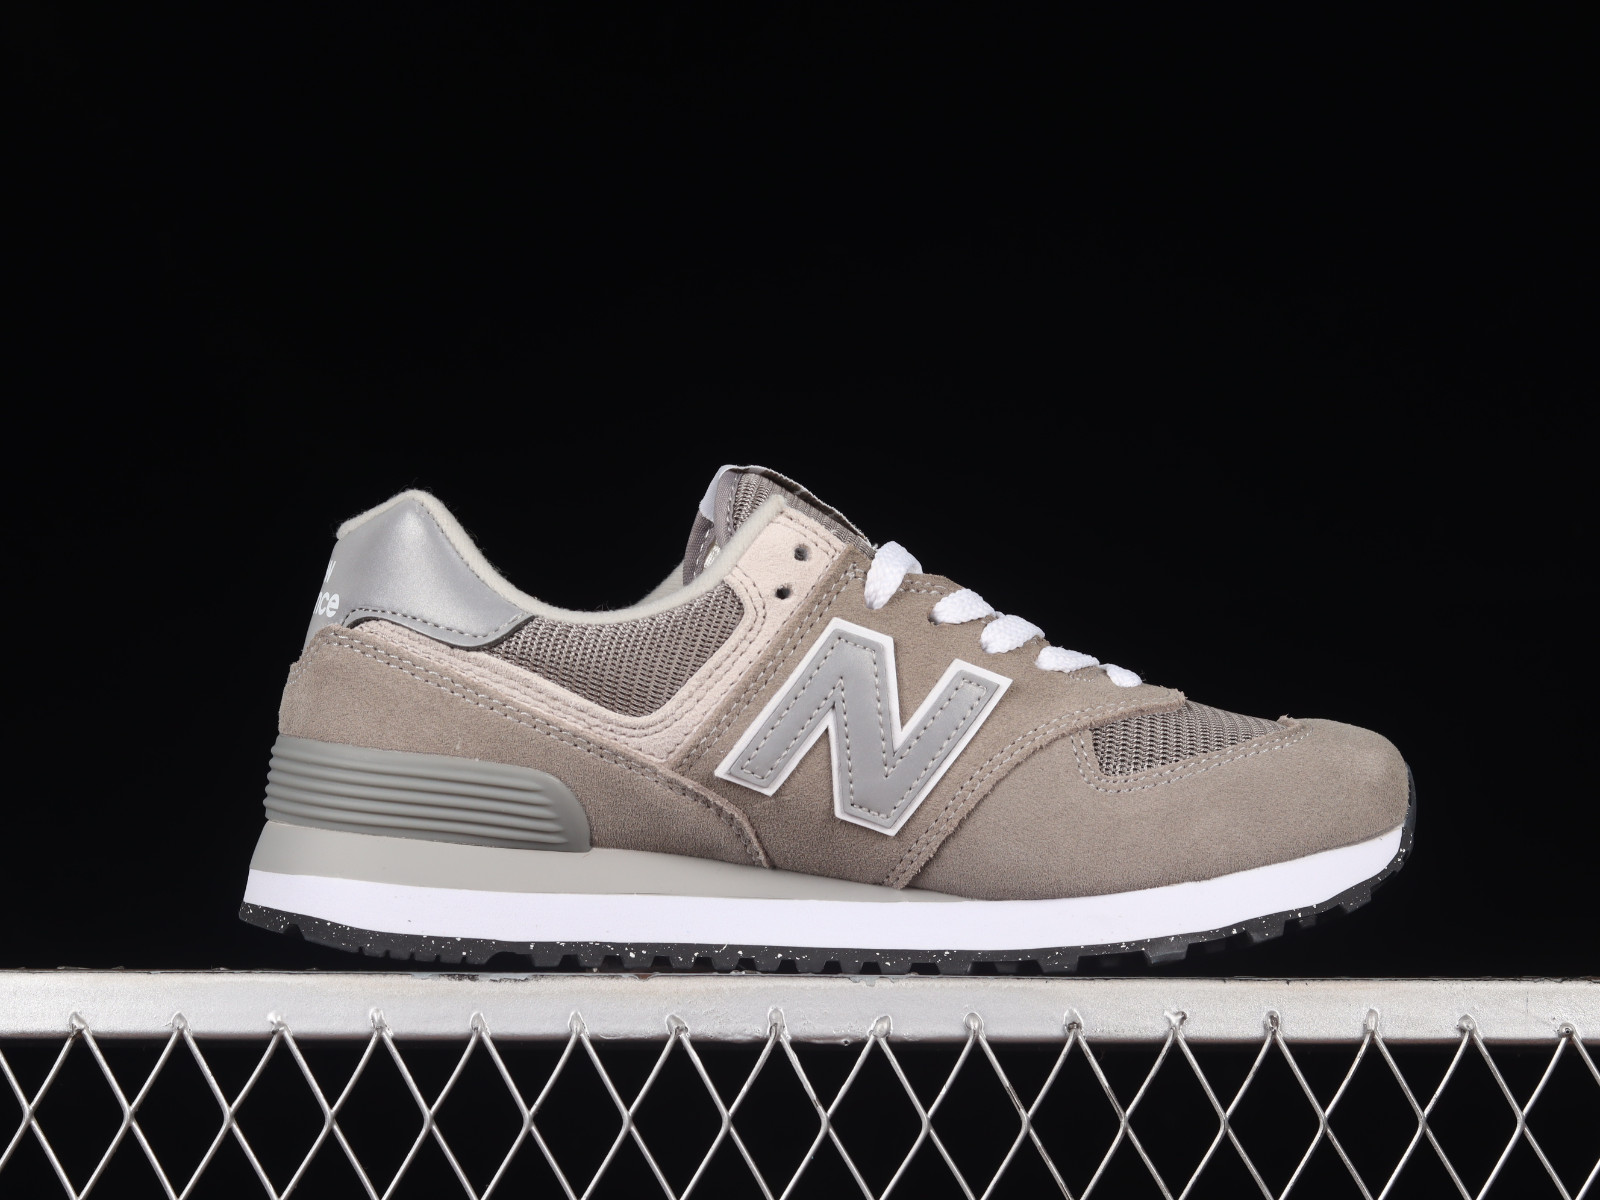 New Balance 574 Grey White Silver ML574EVG - New Balance Shoes - Sepcleat